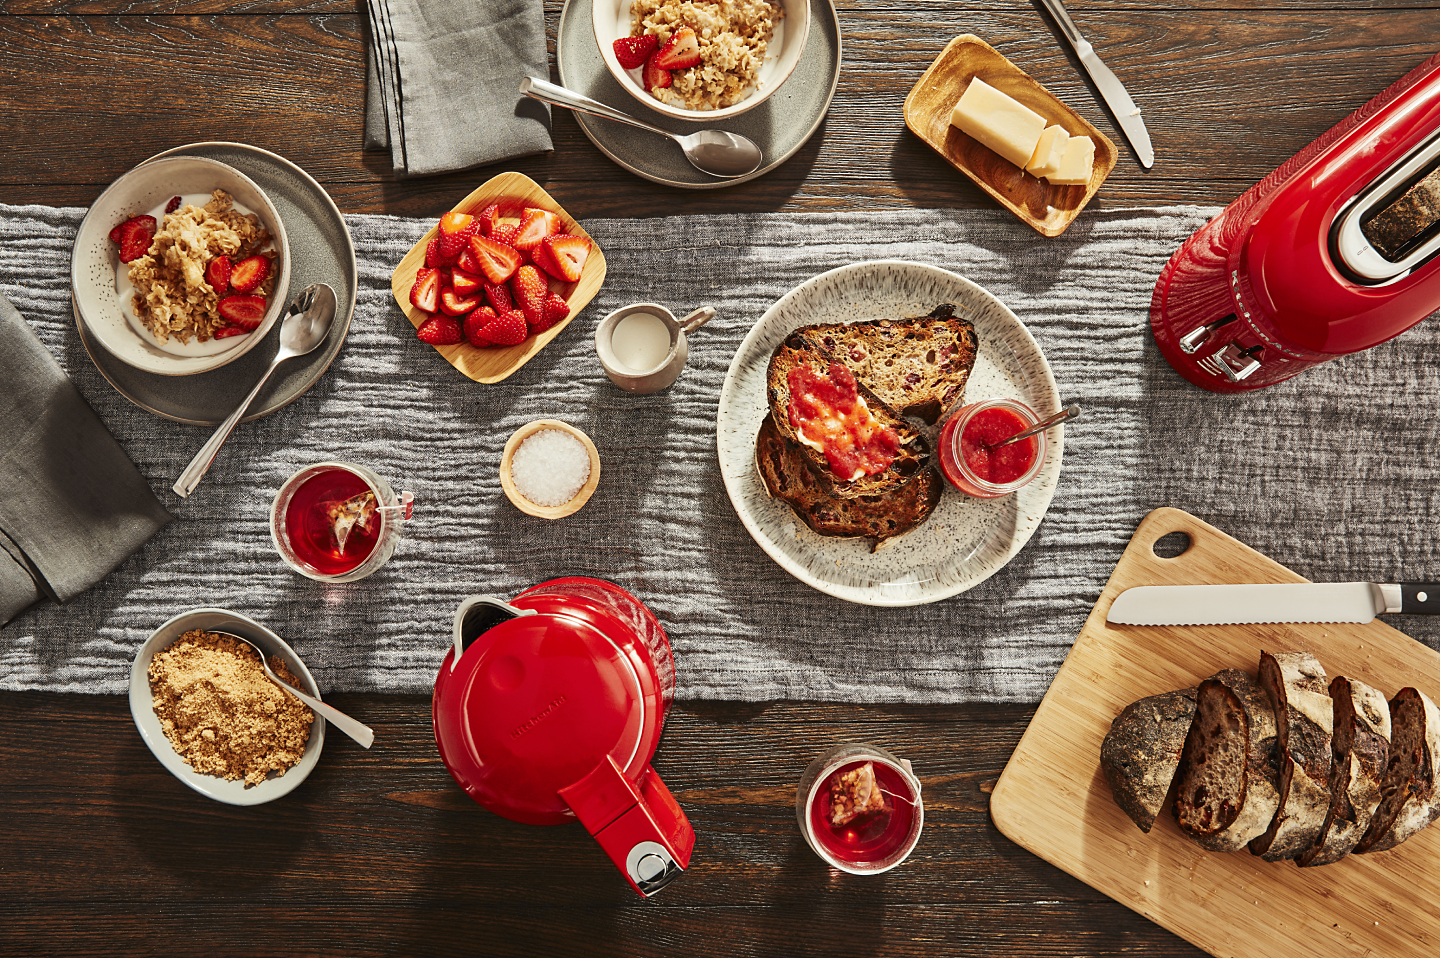 Breakfast foods next to red KitchenAid® countertop appliances